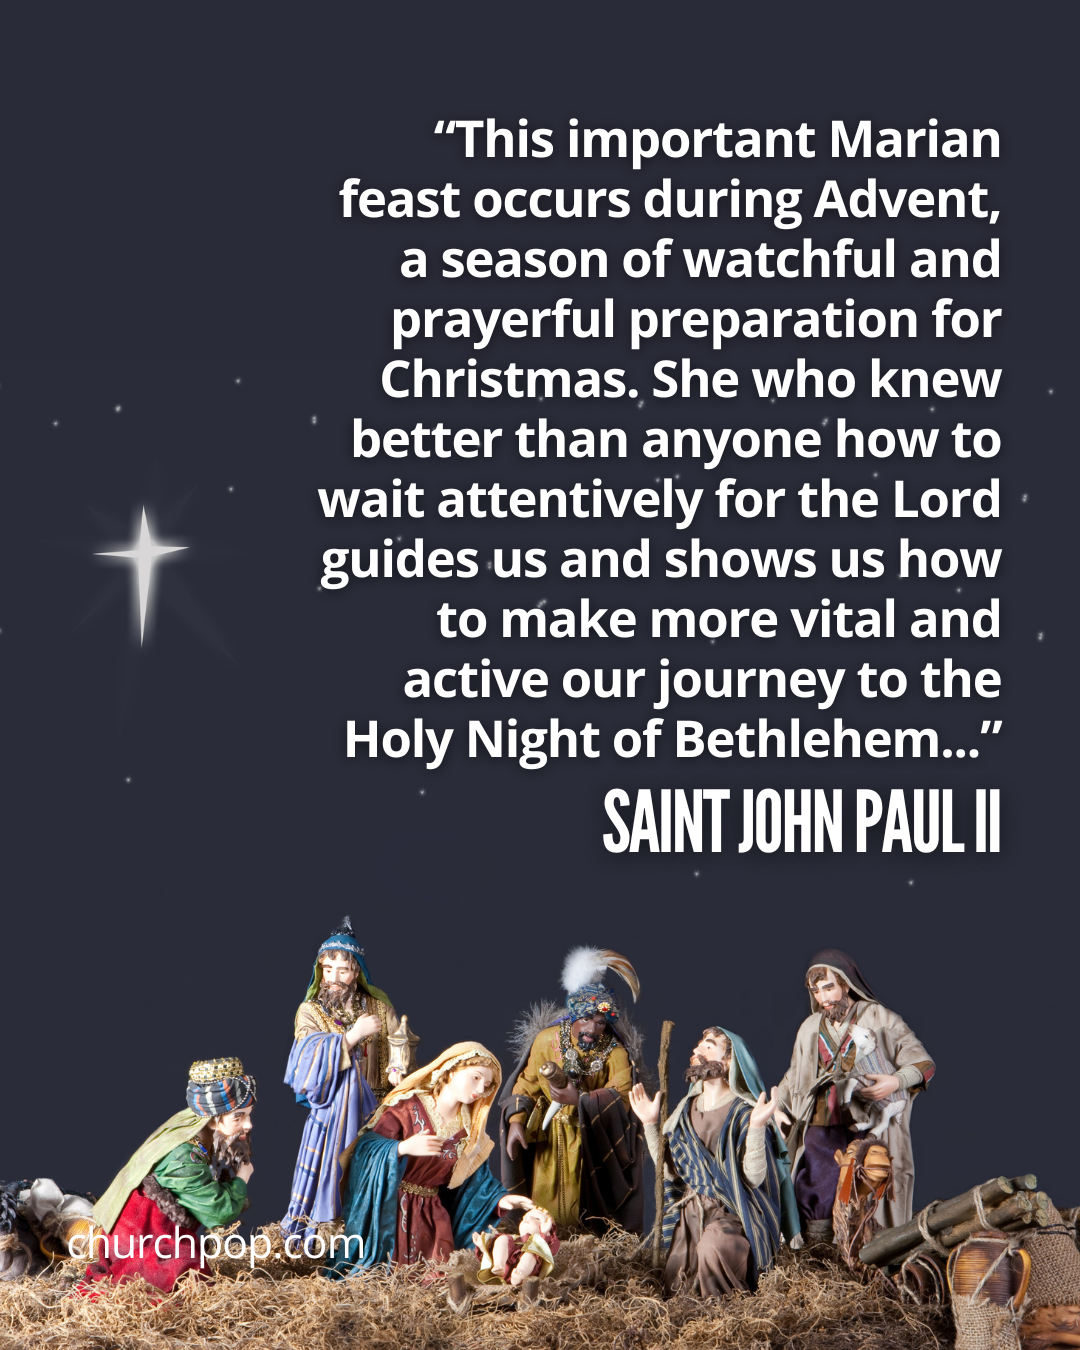 john paul ii saint, john paul ii pope, john paul ii saint, immaculate conception feast